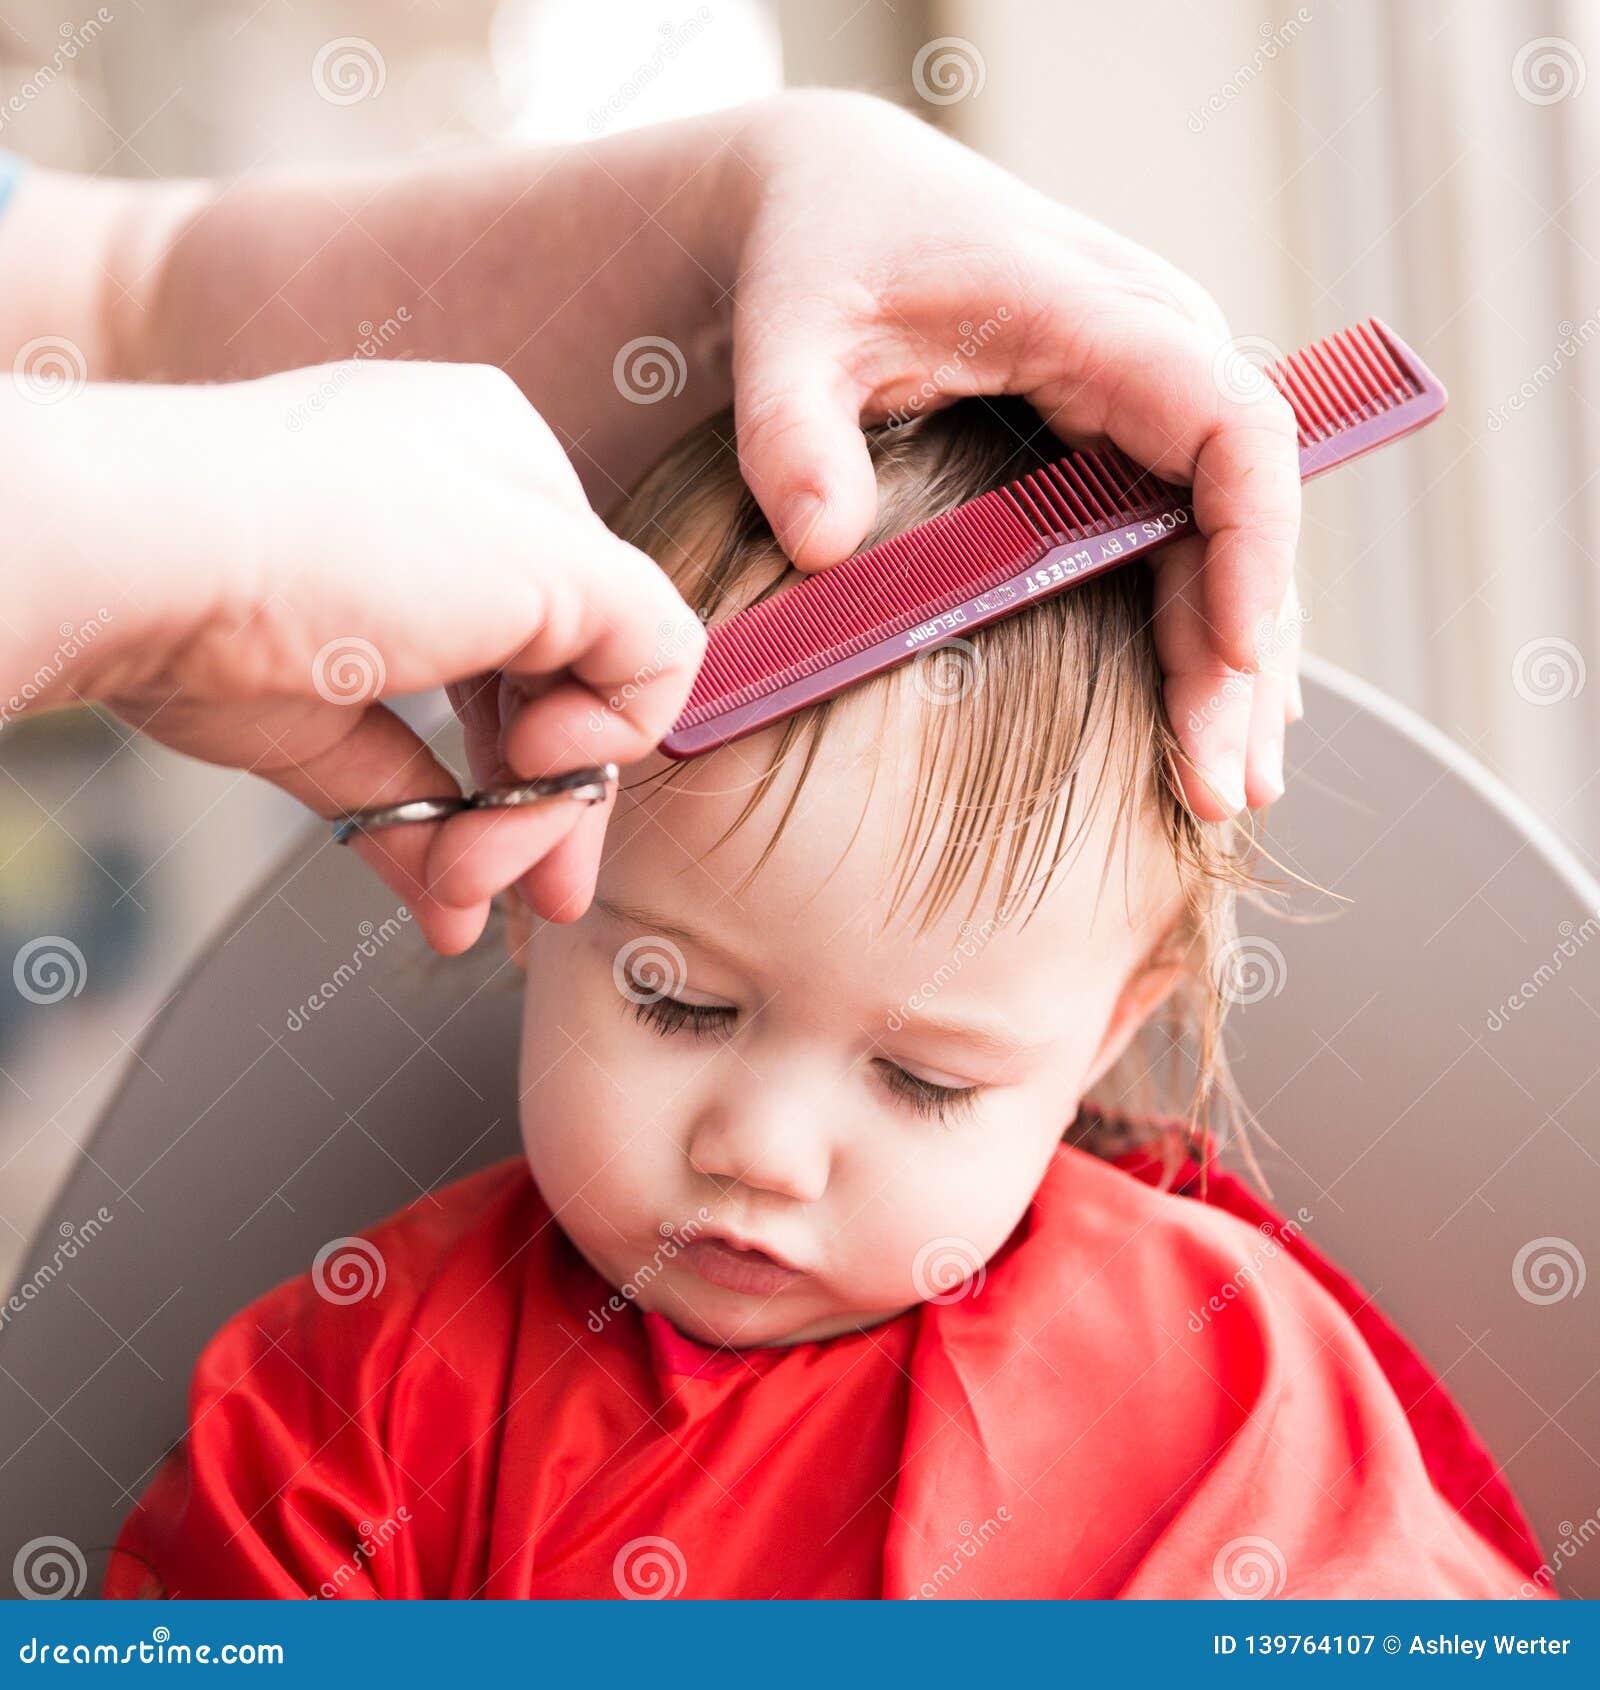 Baby Boys First Haircut Stock Image Image Of Growing 139764107